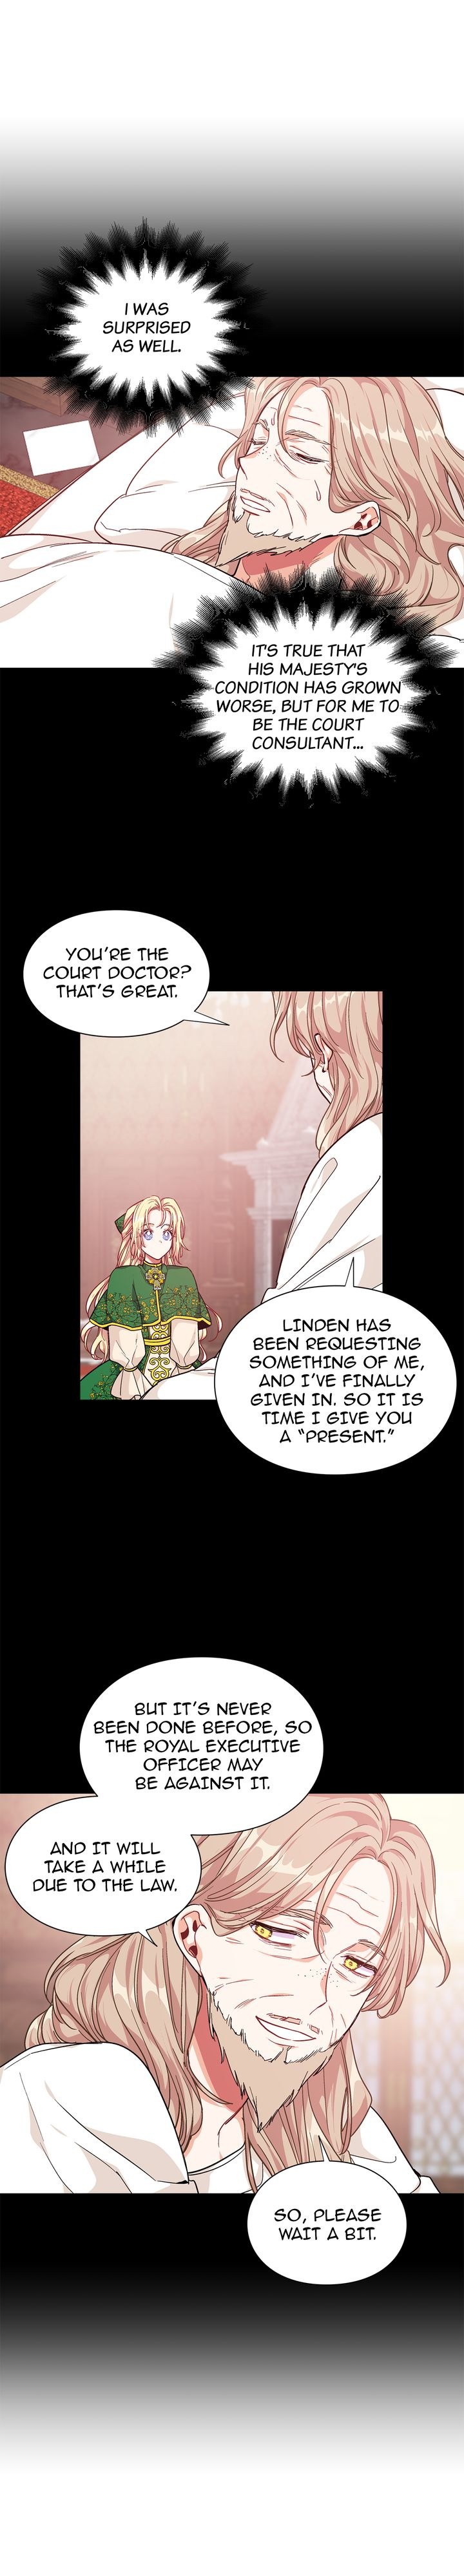 Doctor Elise – The Royal Lady with the Lamp - Chapter 91 Page 15